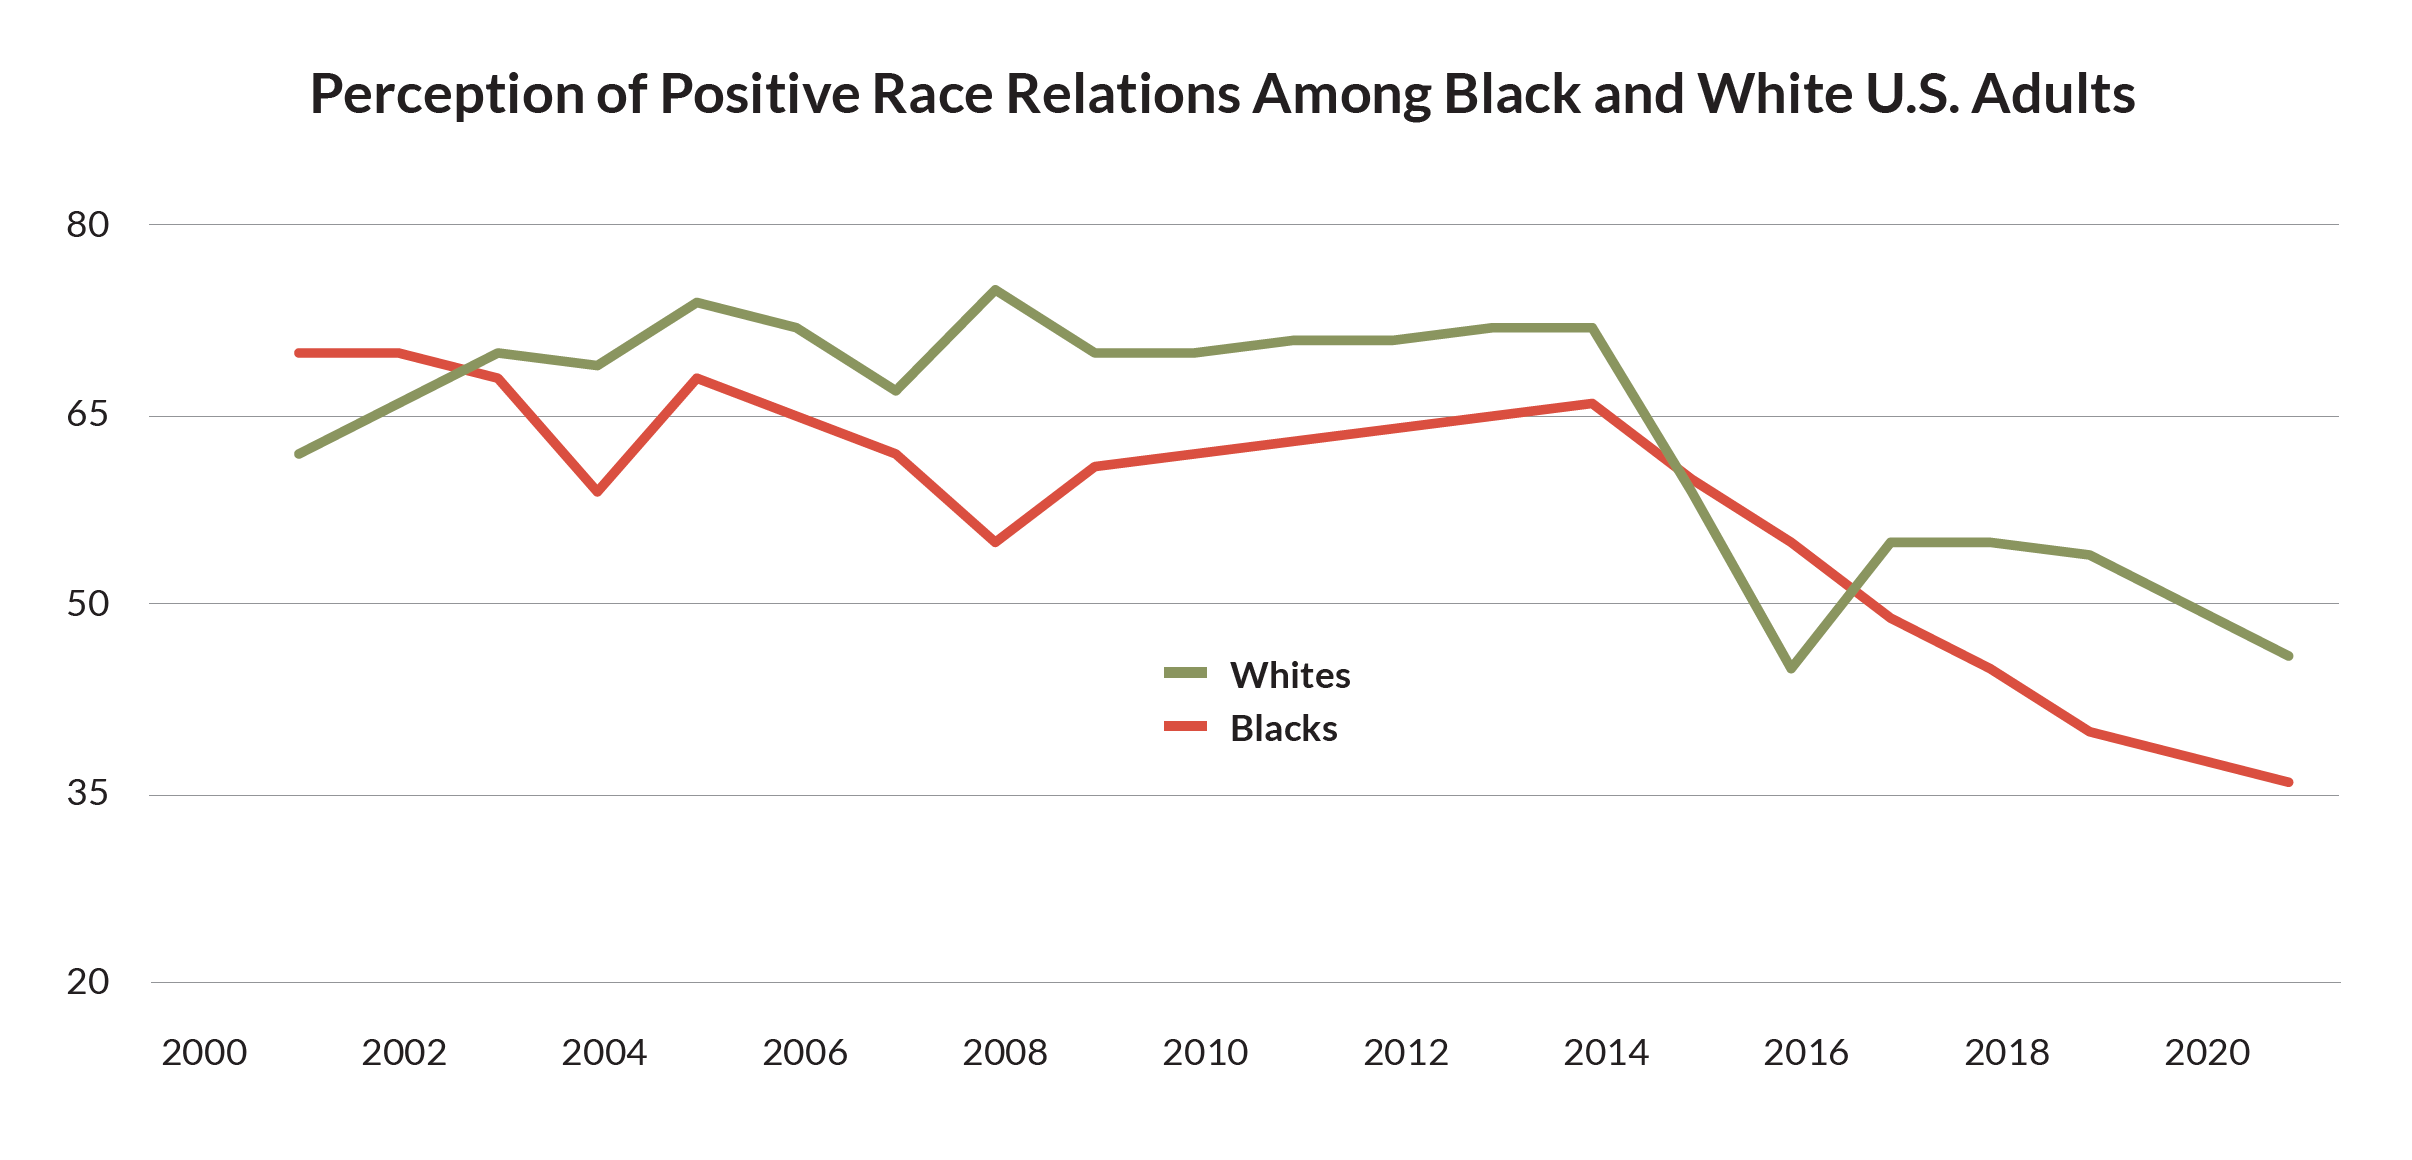 Perception of Positive Race Relations Among Black and White U.S. Adults